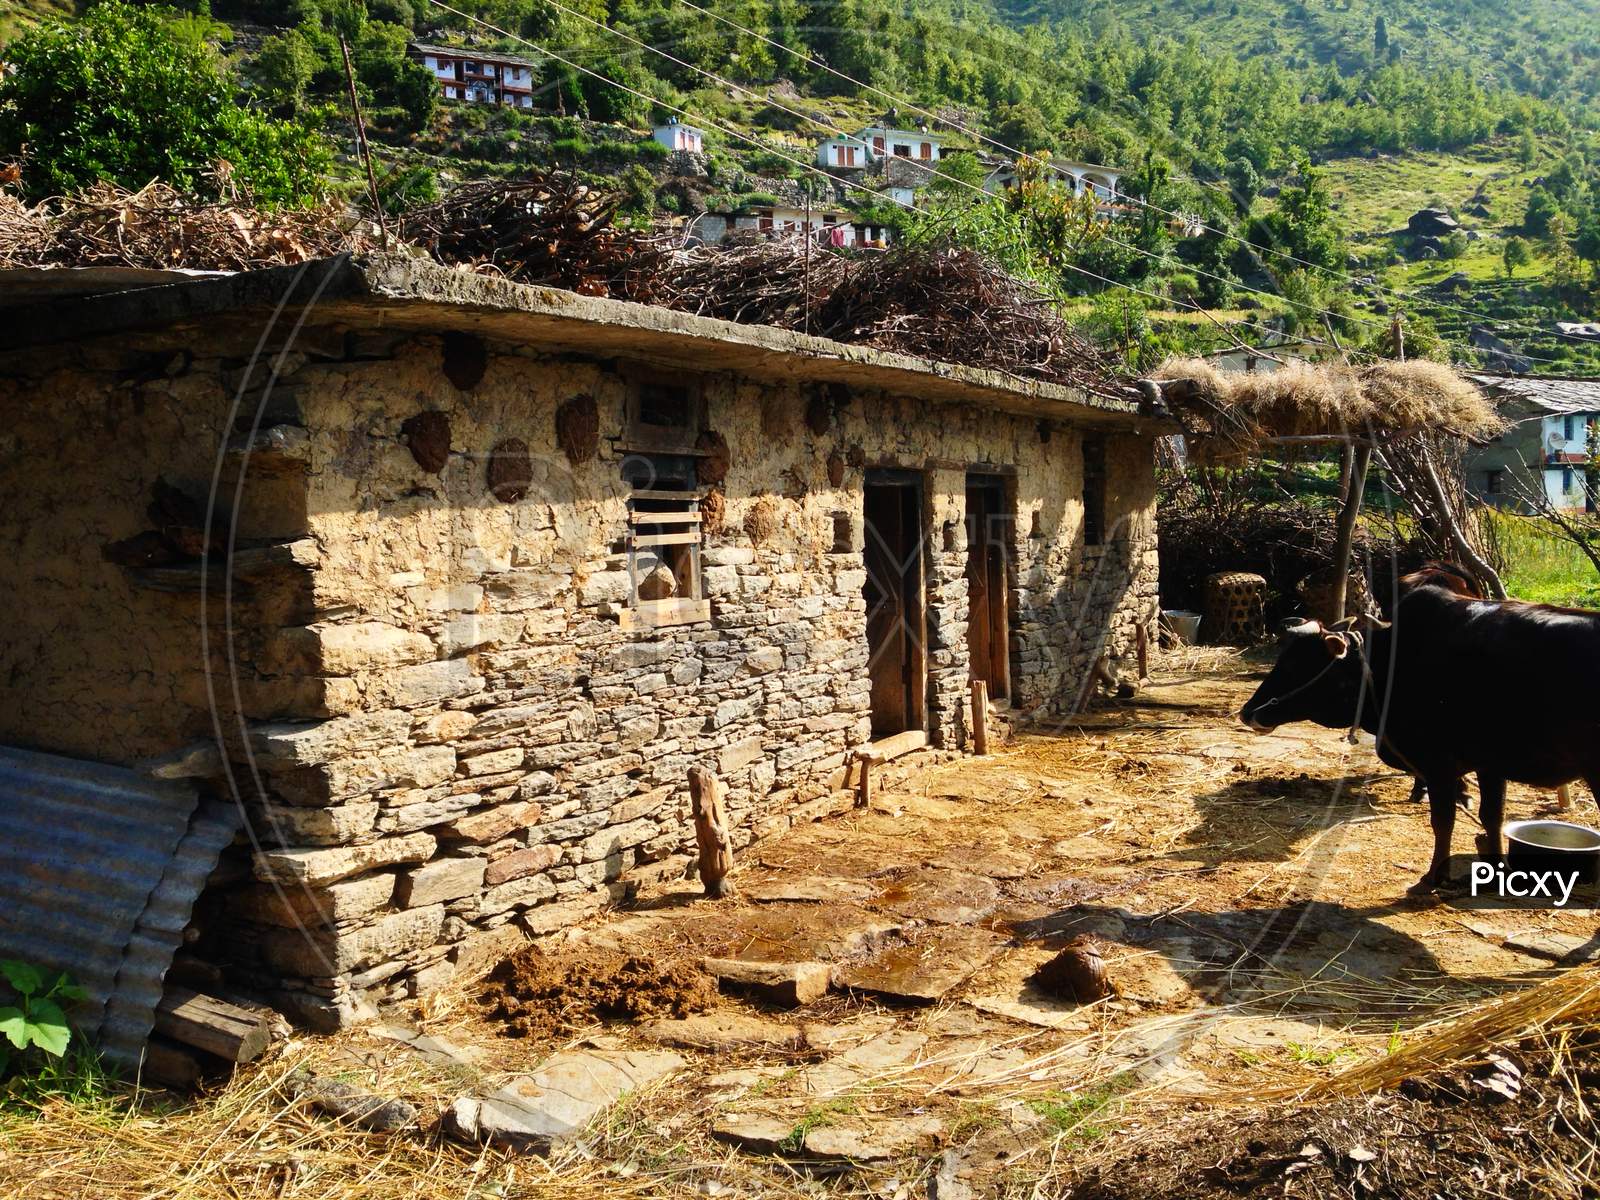 Village scene from a Himalayan Town